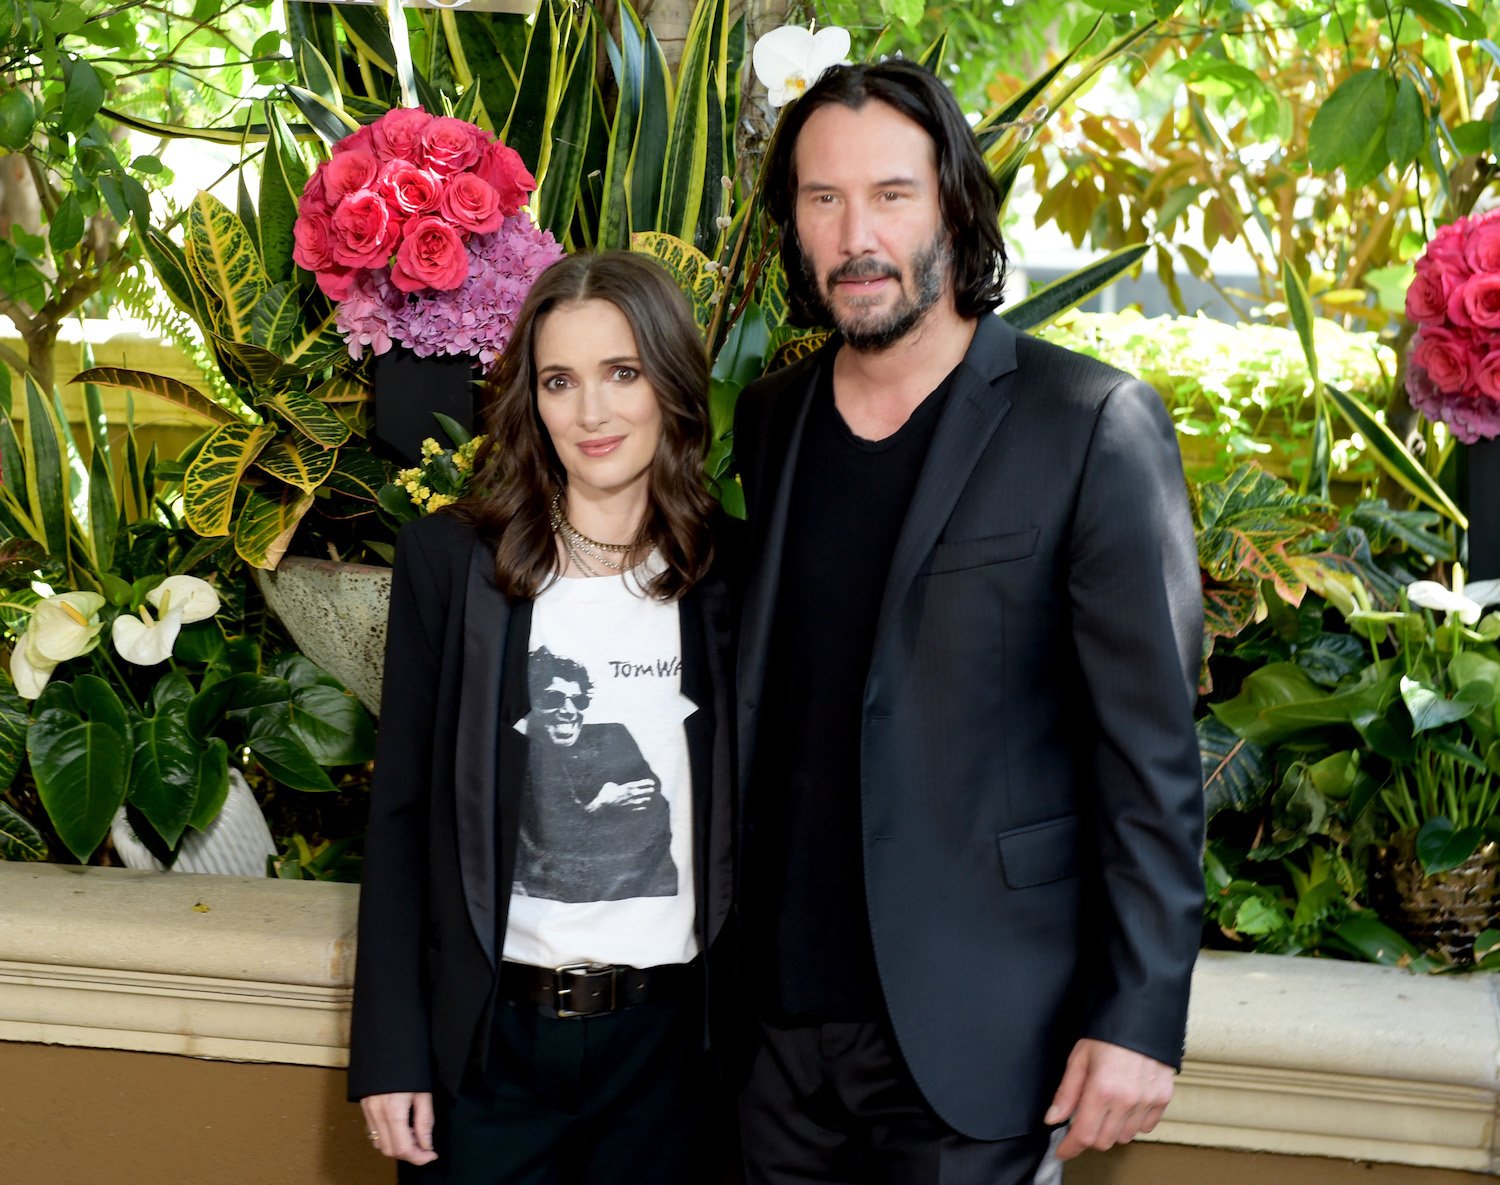 How Did Winona Ryder and Keanu Reeves Meet?